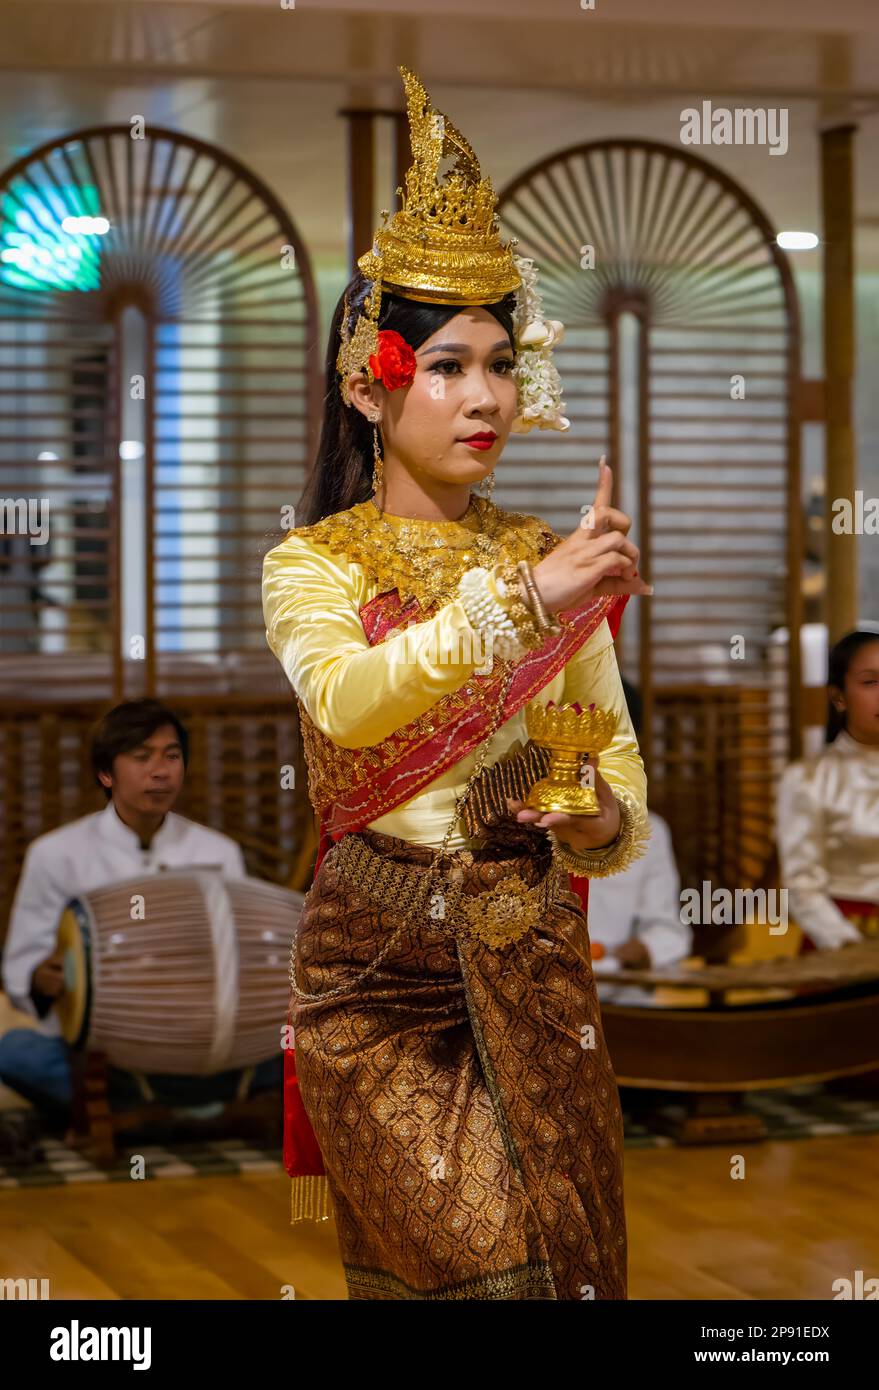 Traditional Khmer dancers in Cambodia perform on a river cruise ship moored in the capital Phnom Penh. Stock Photo